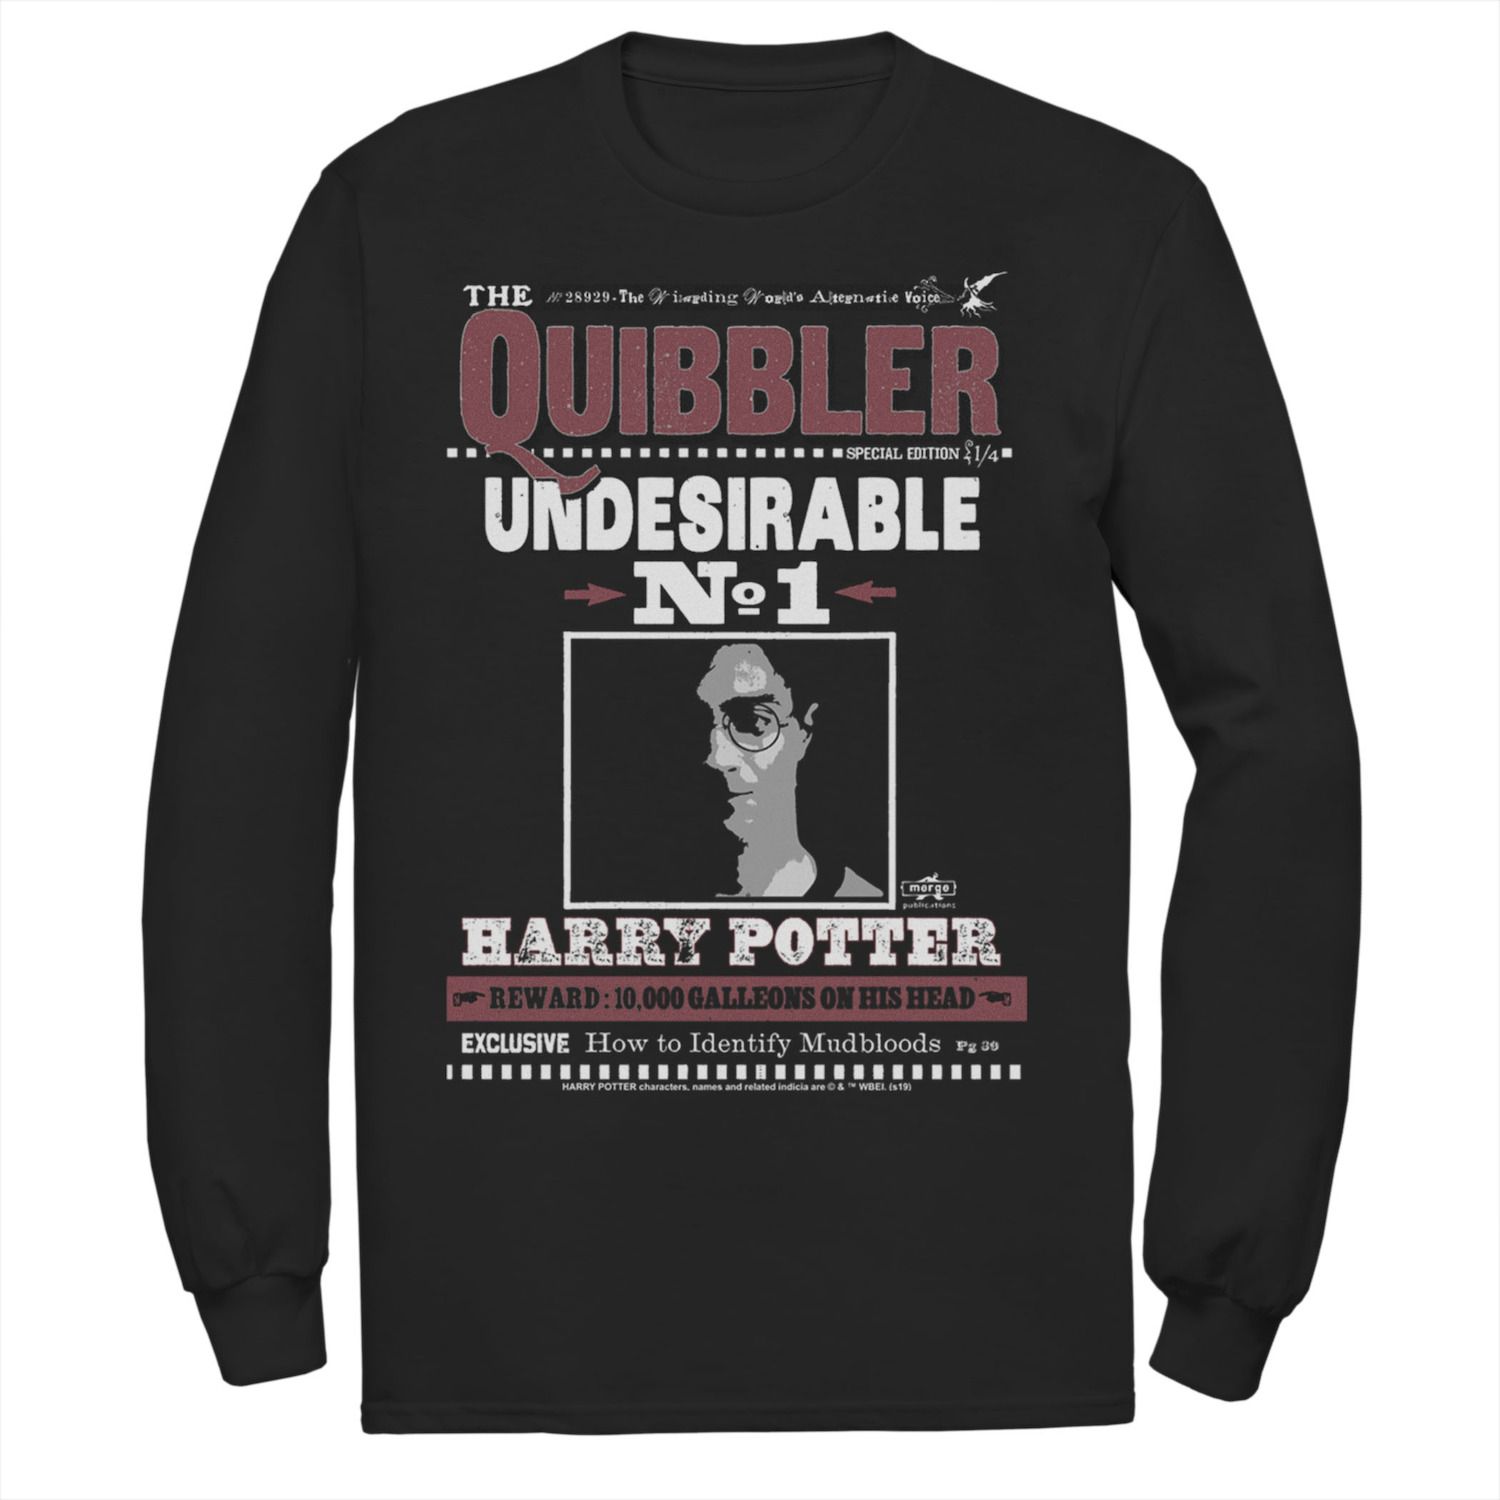 Image for Harry Potter Men's The Quibbler Undesirable Number 1 Long Sleeve Graphic Tee at Kohl's.